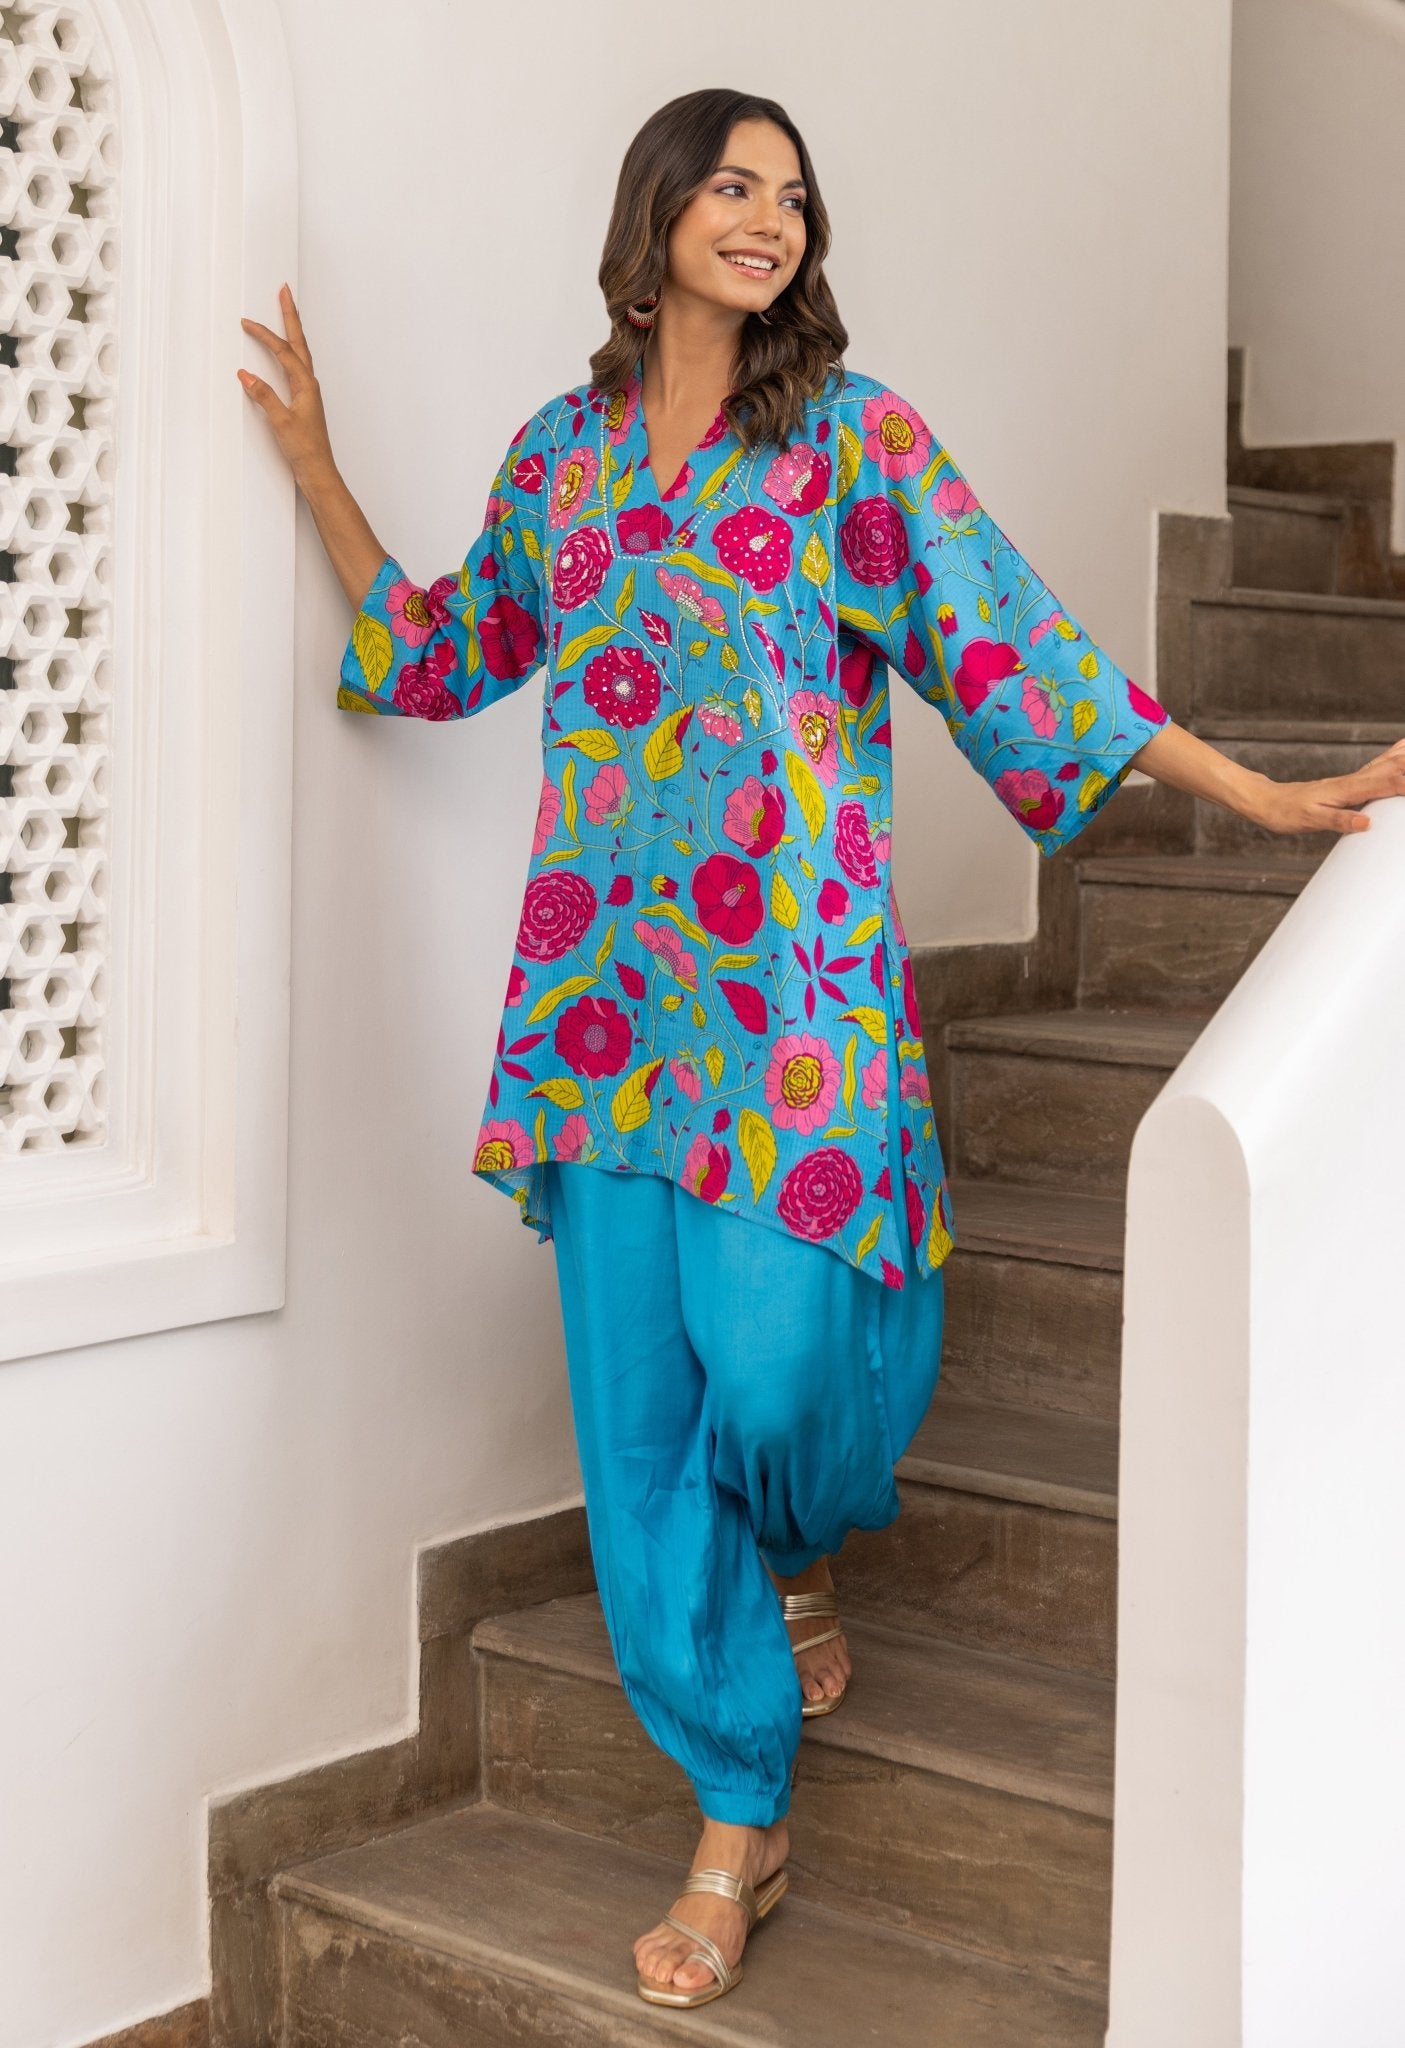 Turquoise Hand Embroidered Peppy Floral Co-ord set - Tara-C-Tara